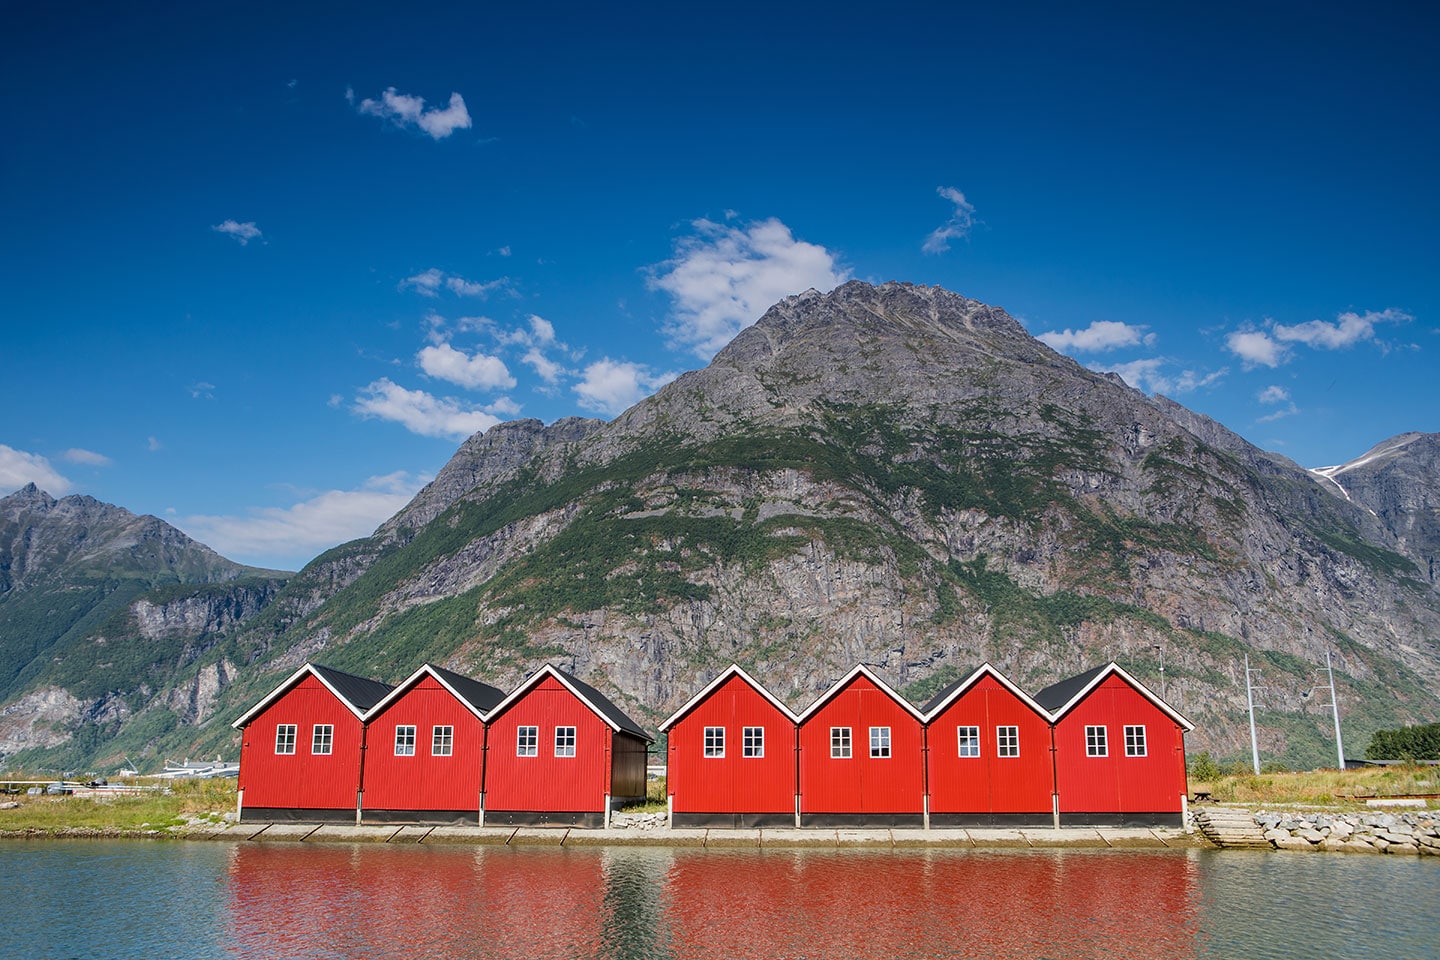 Red rorbuer houses at Sunndalsøra in Norway